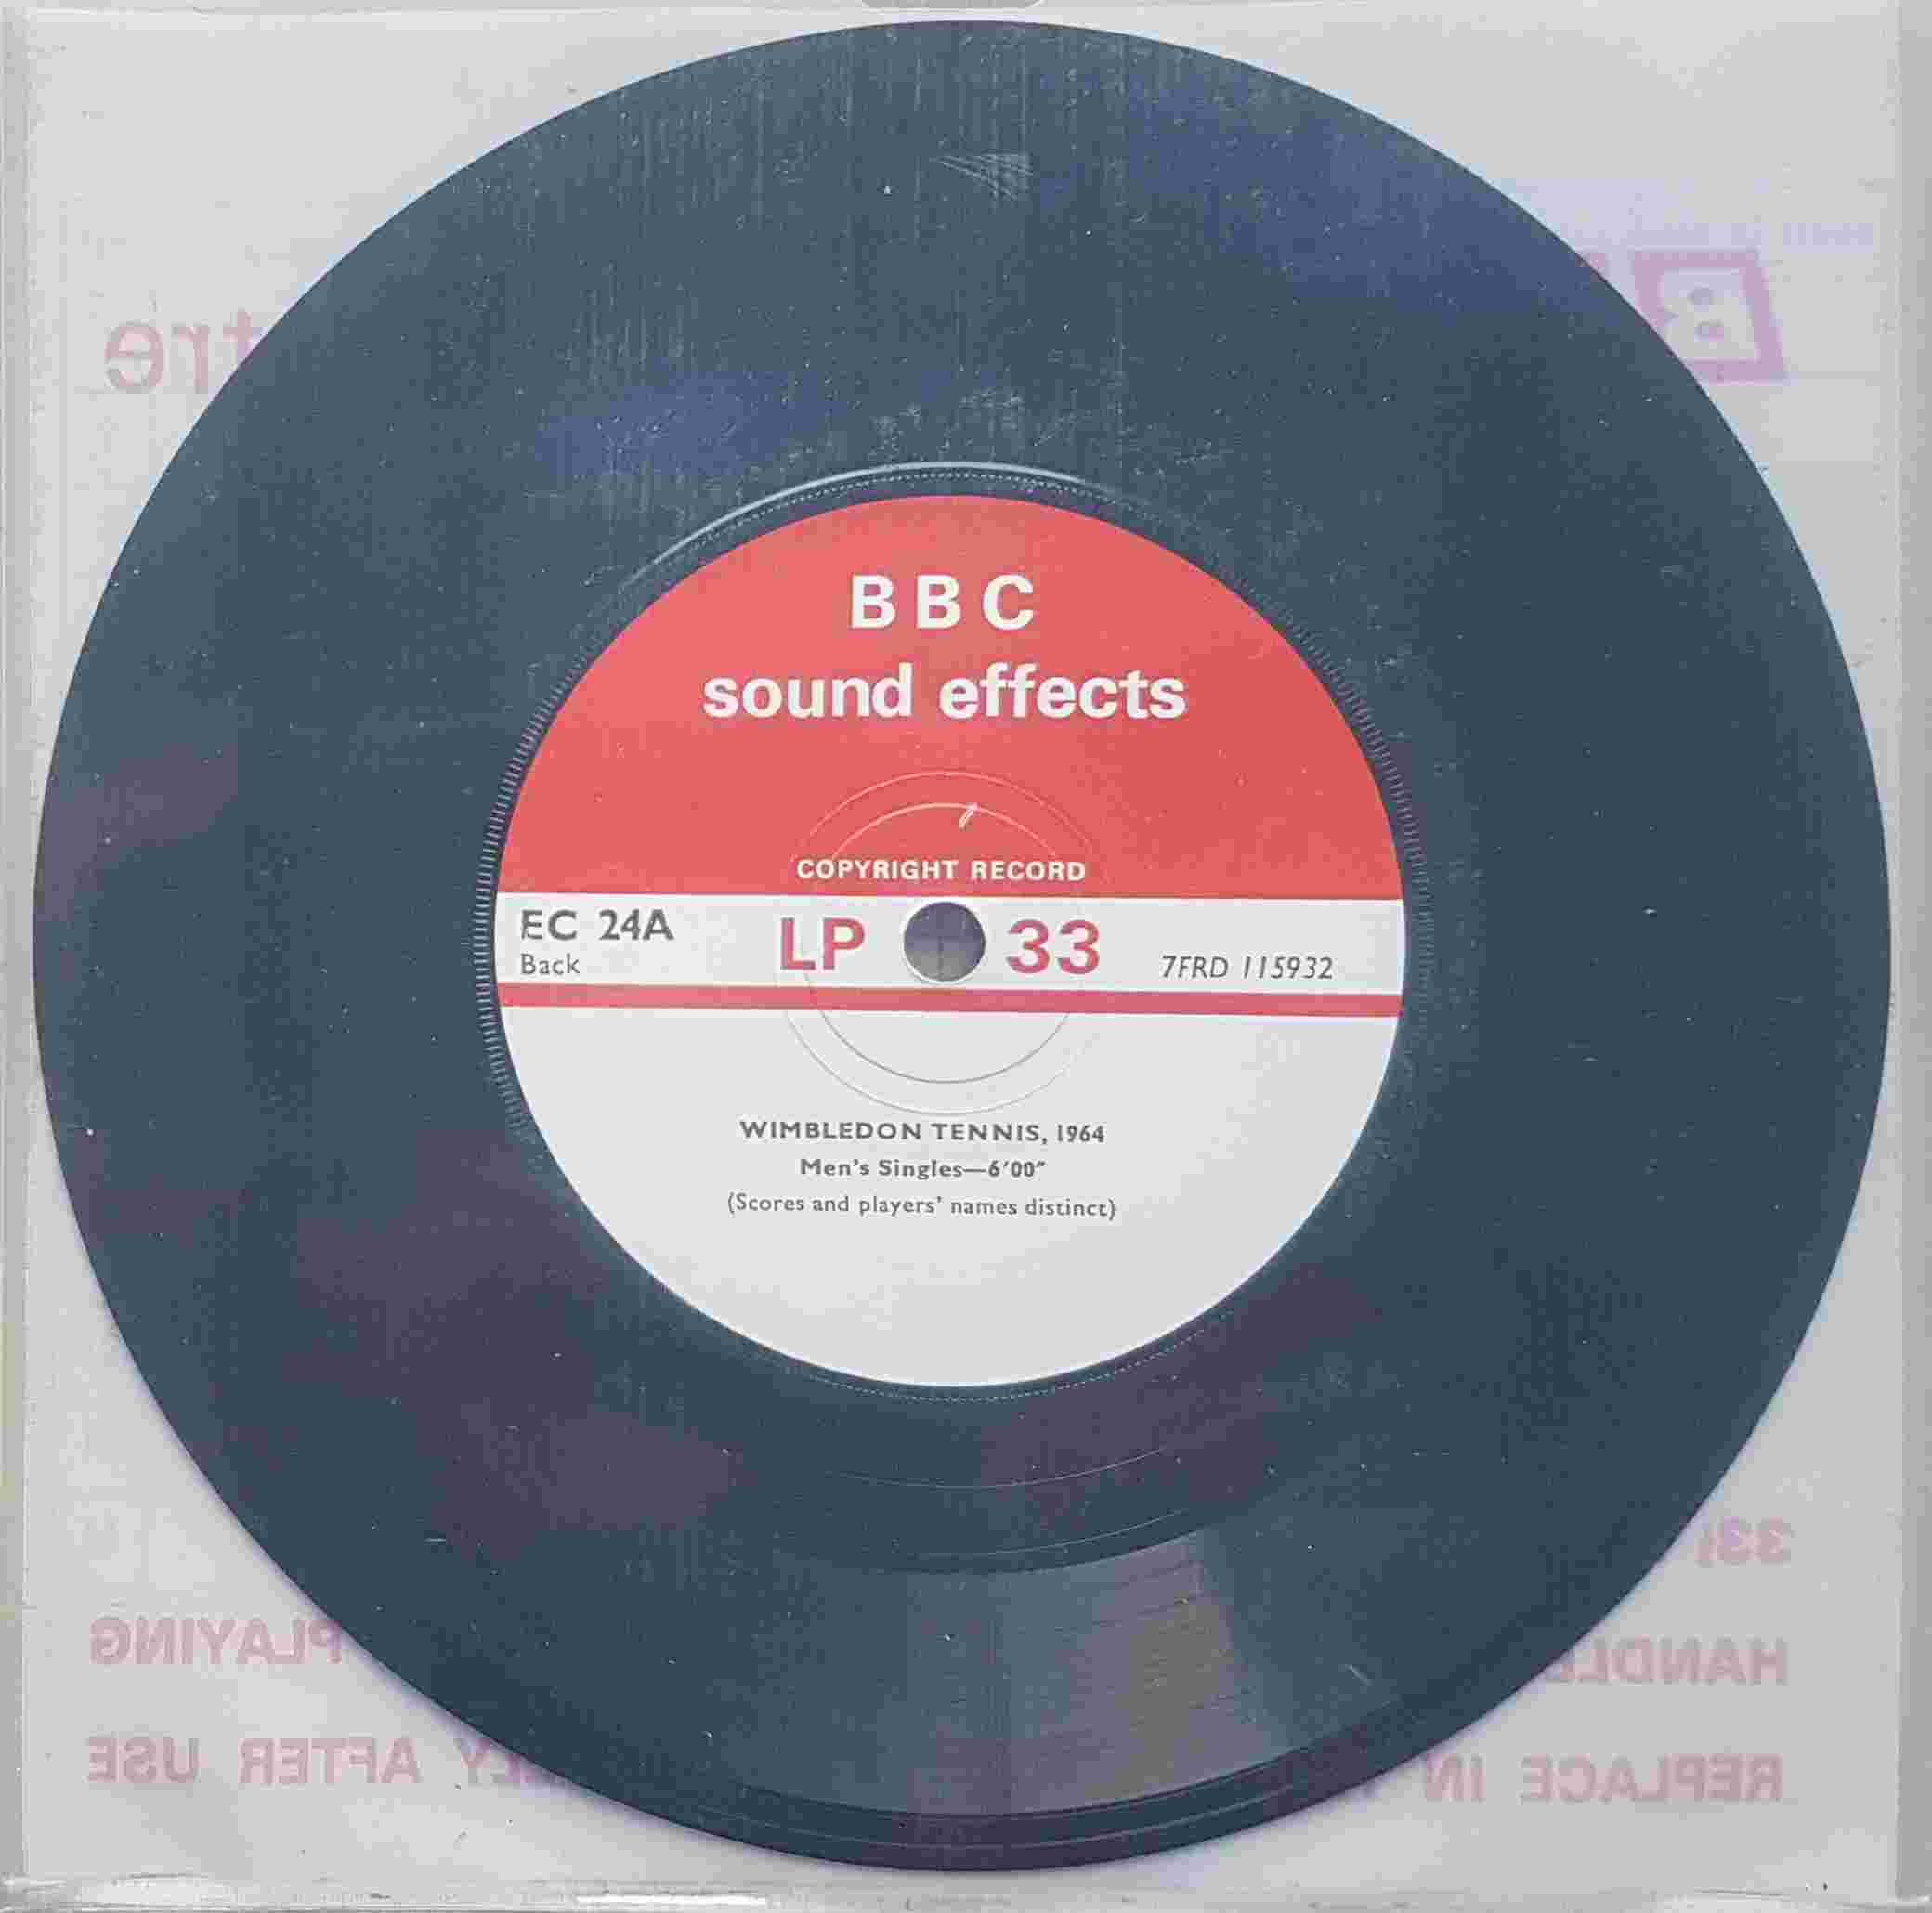 Picture of EC 24A Wimbledon tennis, 1964 by artist Not registered from the BBC records and Tapes library